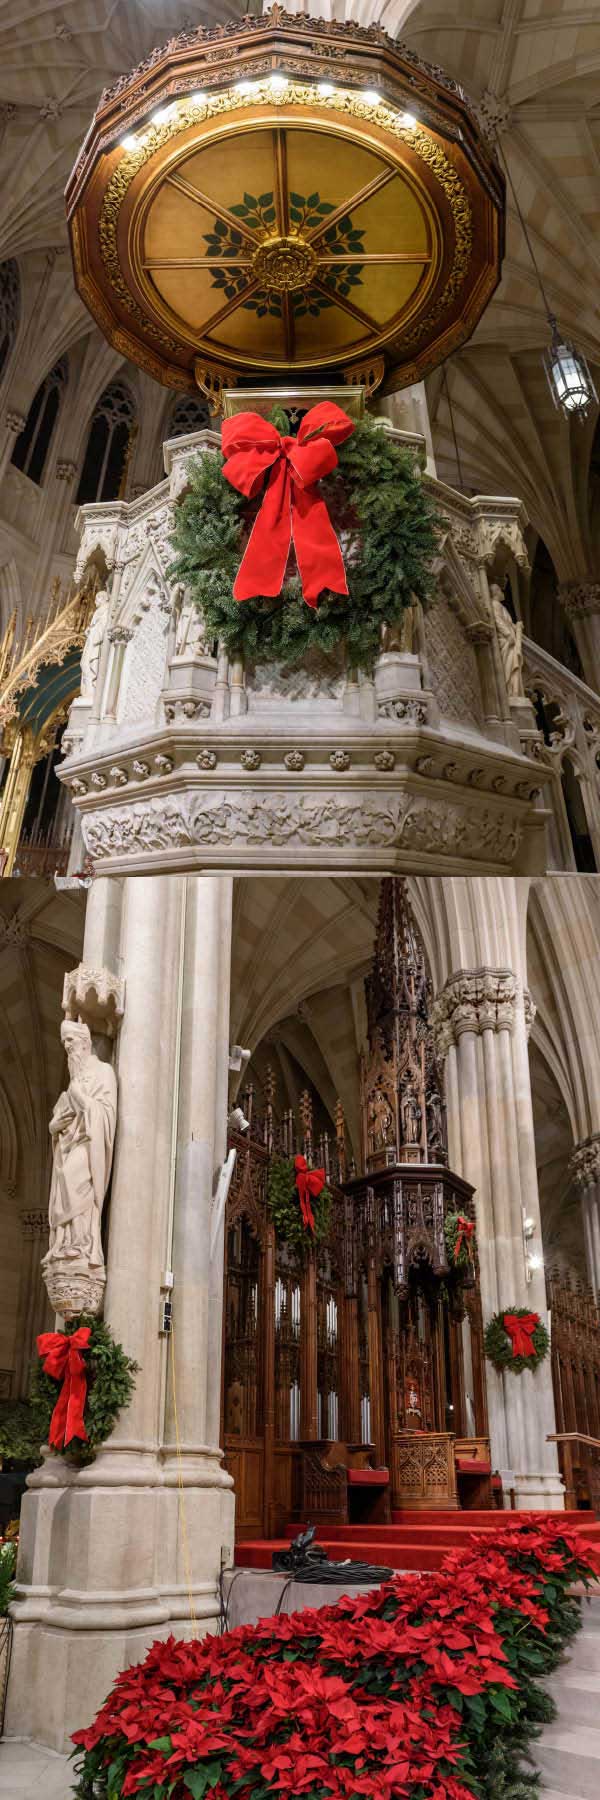 Pulpit and St. Patrick at Christmas time